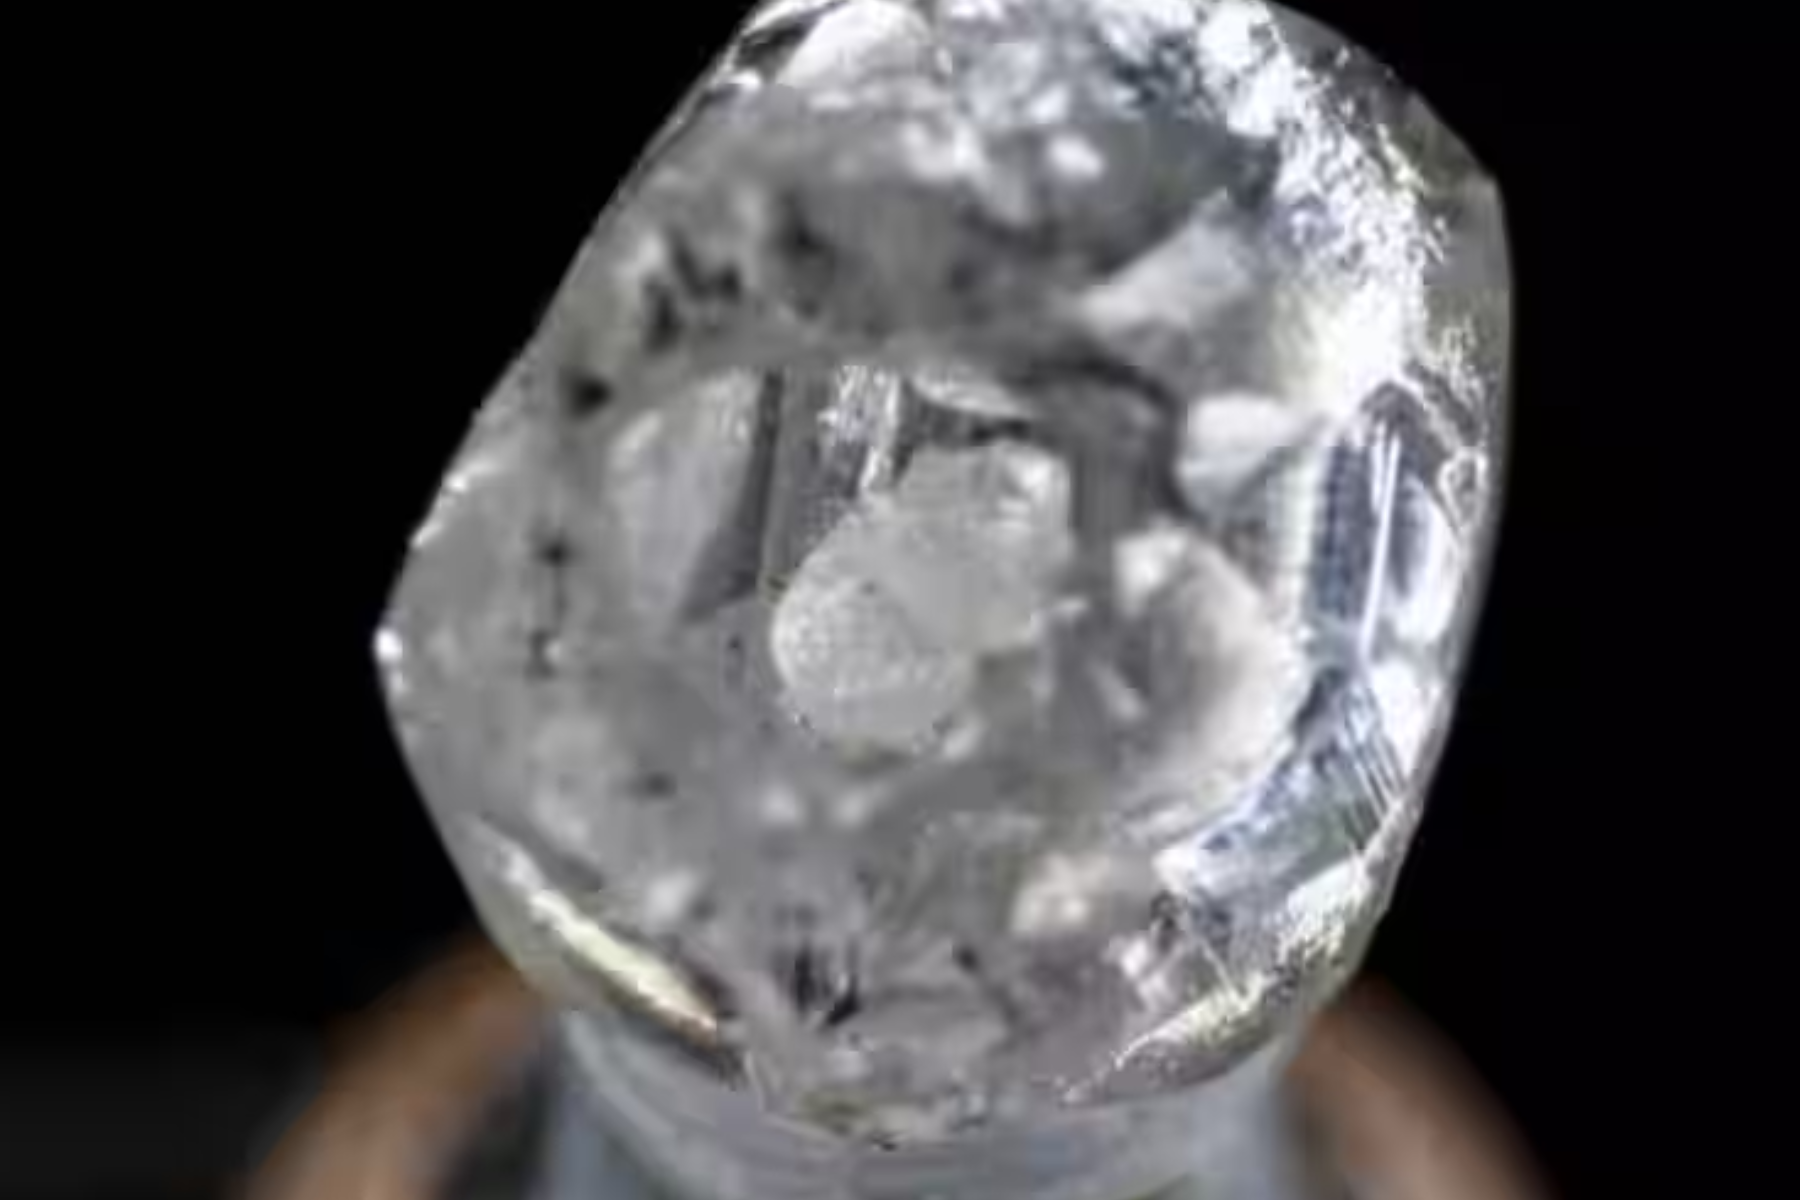 India Gets Its Own 'Matryoshka' Diamond In The Form Of This Rarest Of Rare Find In Gujarat